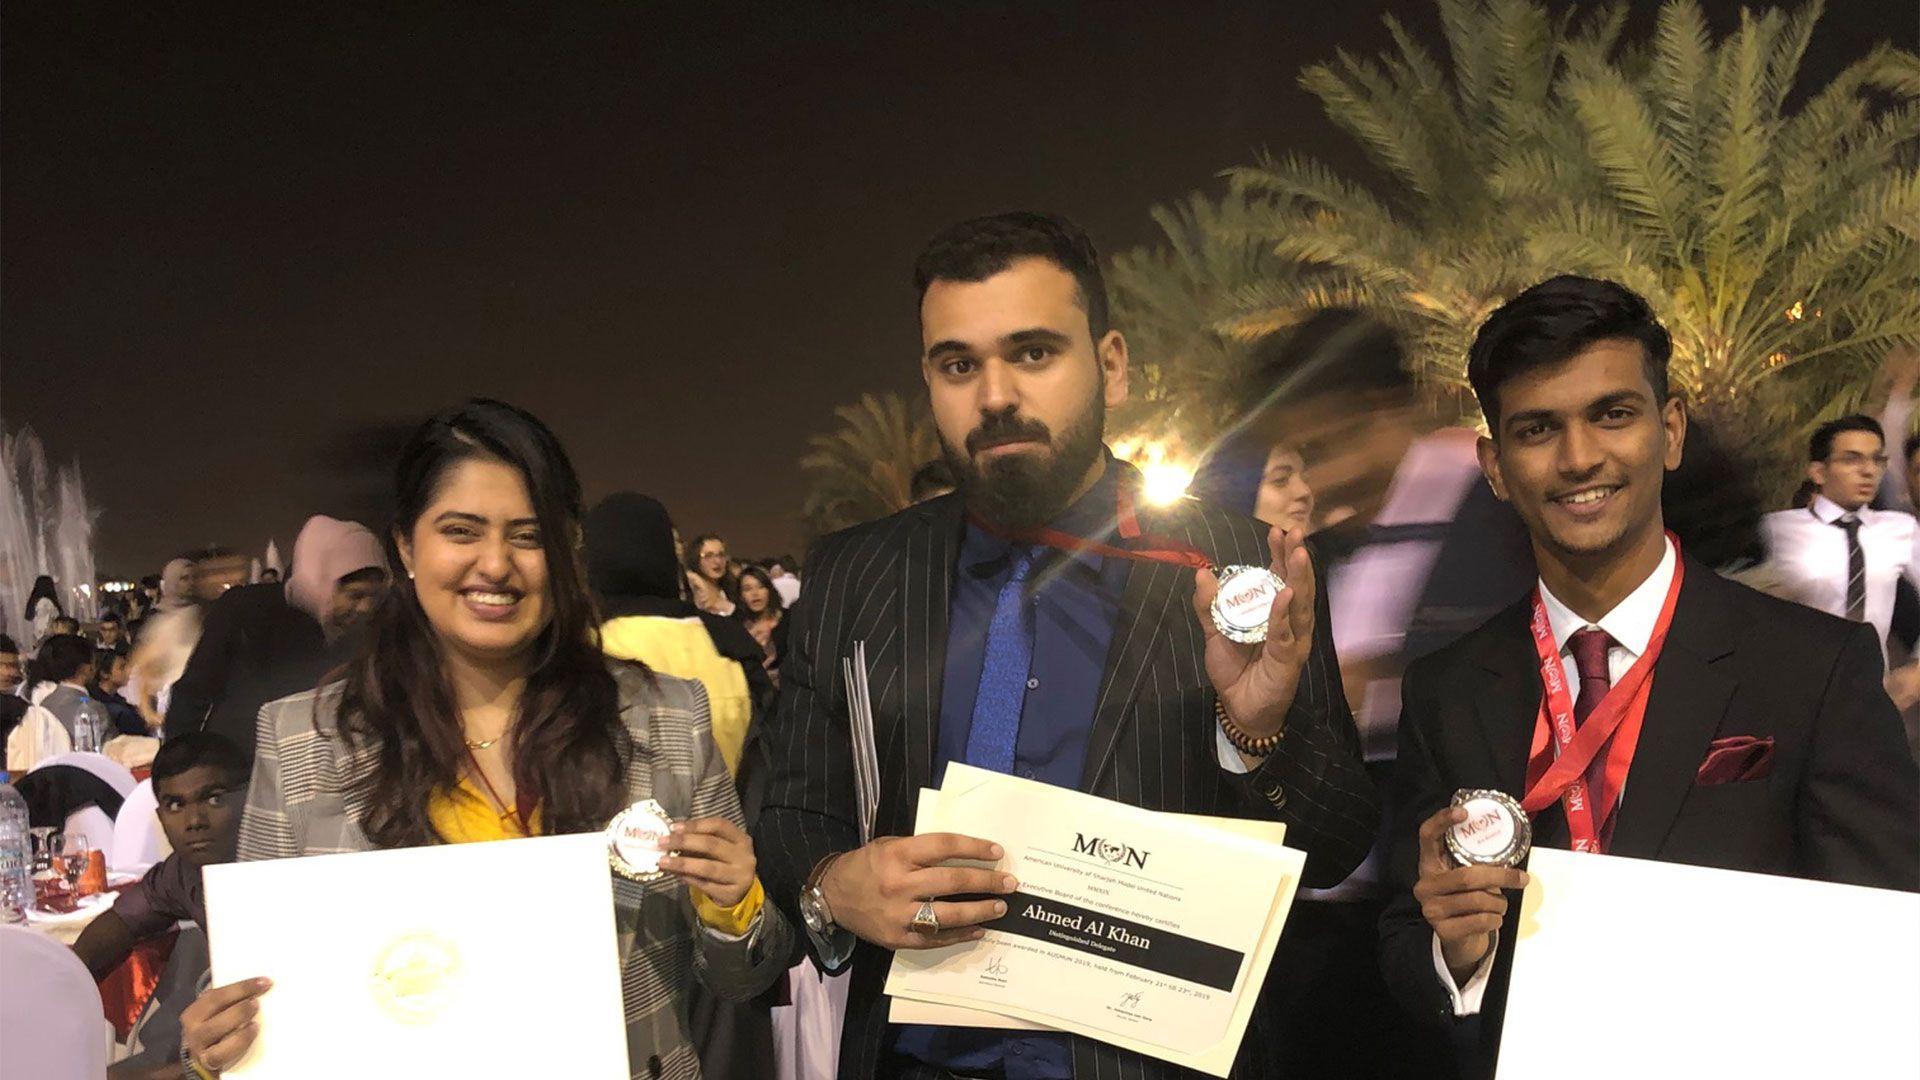 Nine students from MDX Dubai competed in the 11th Model United Nations event organised by the American University of Sharjah